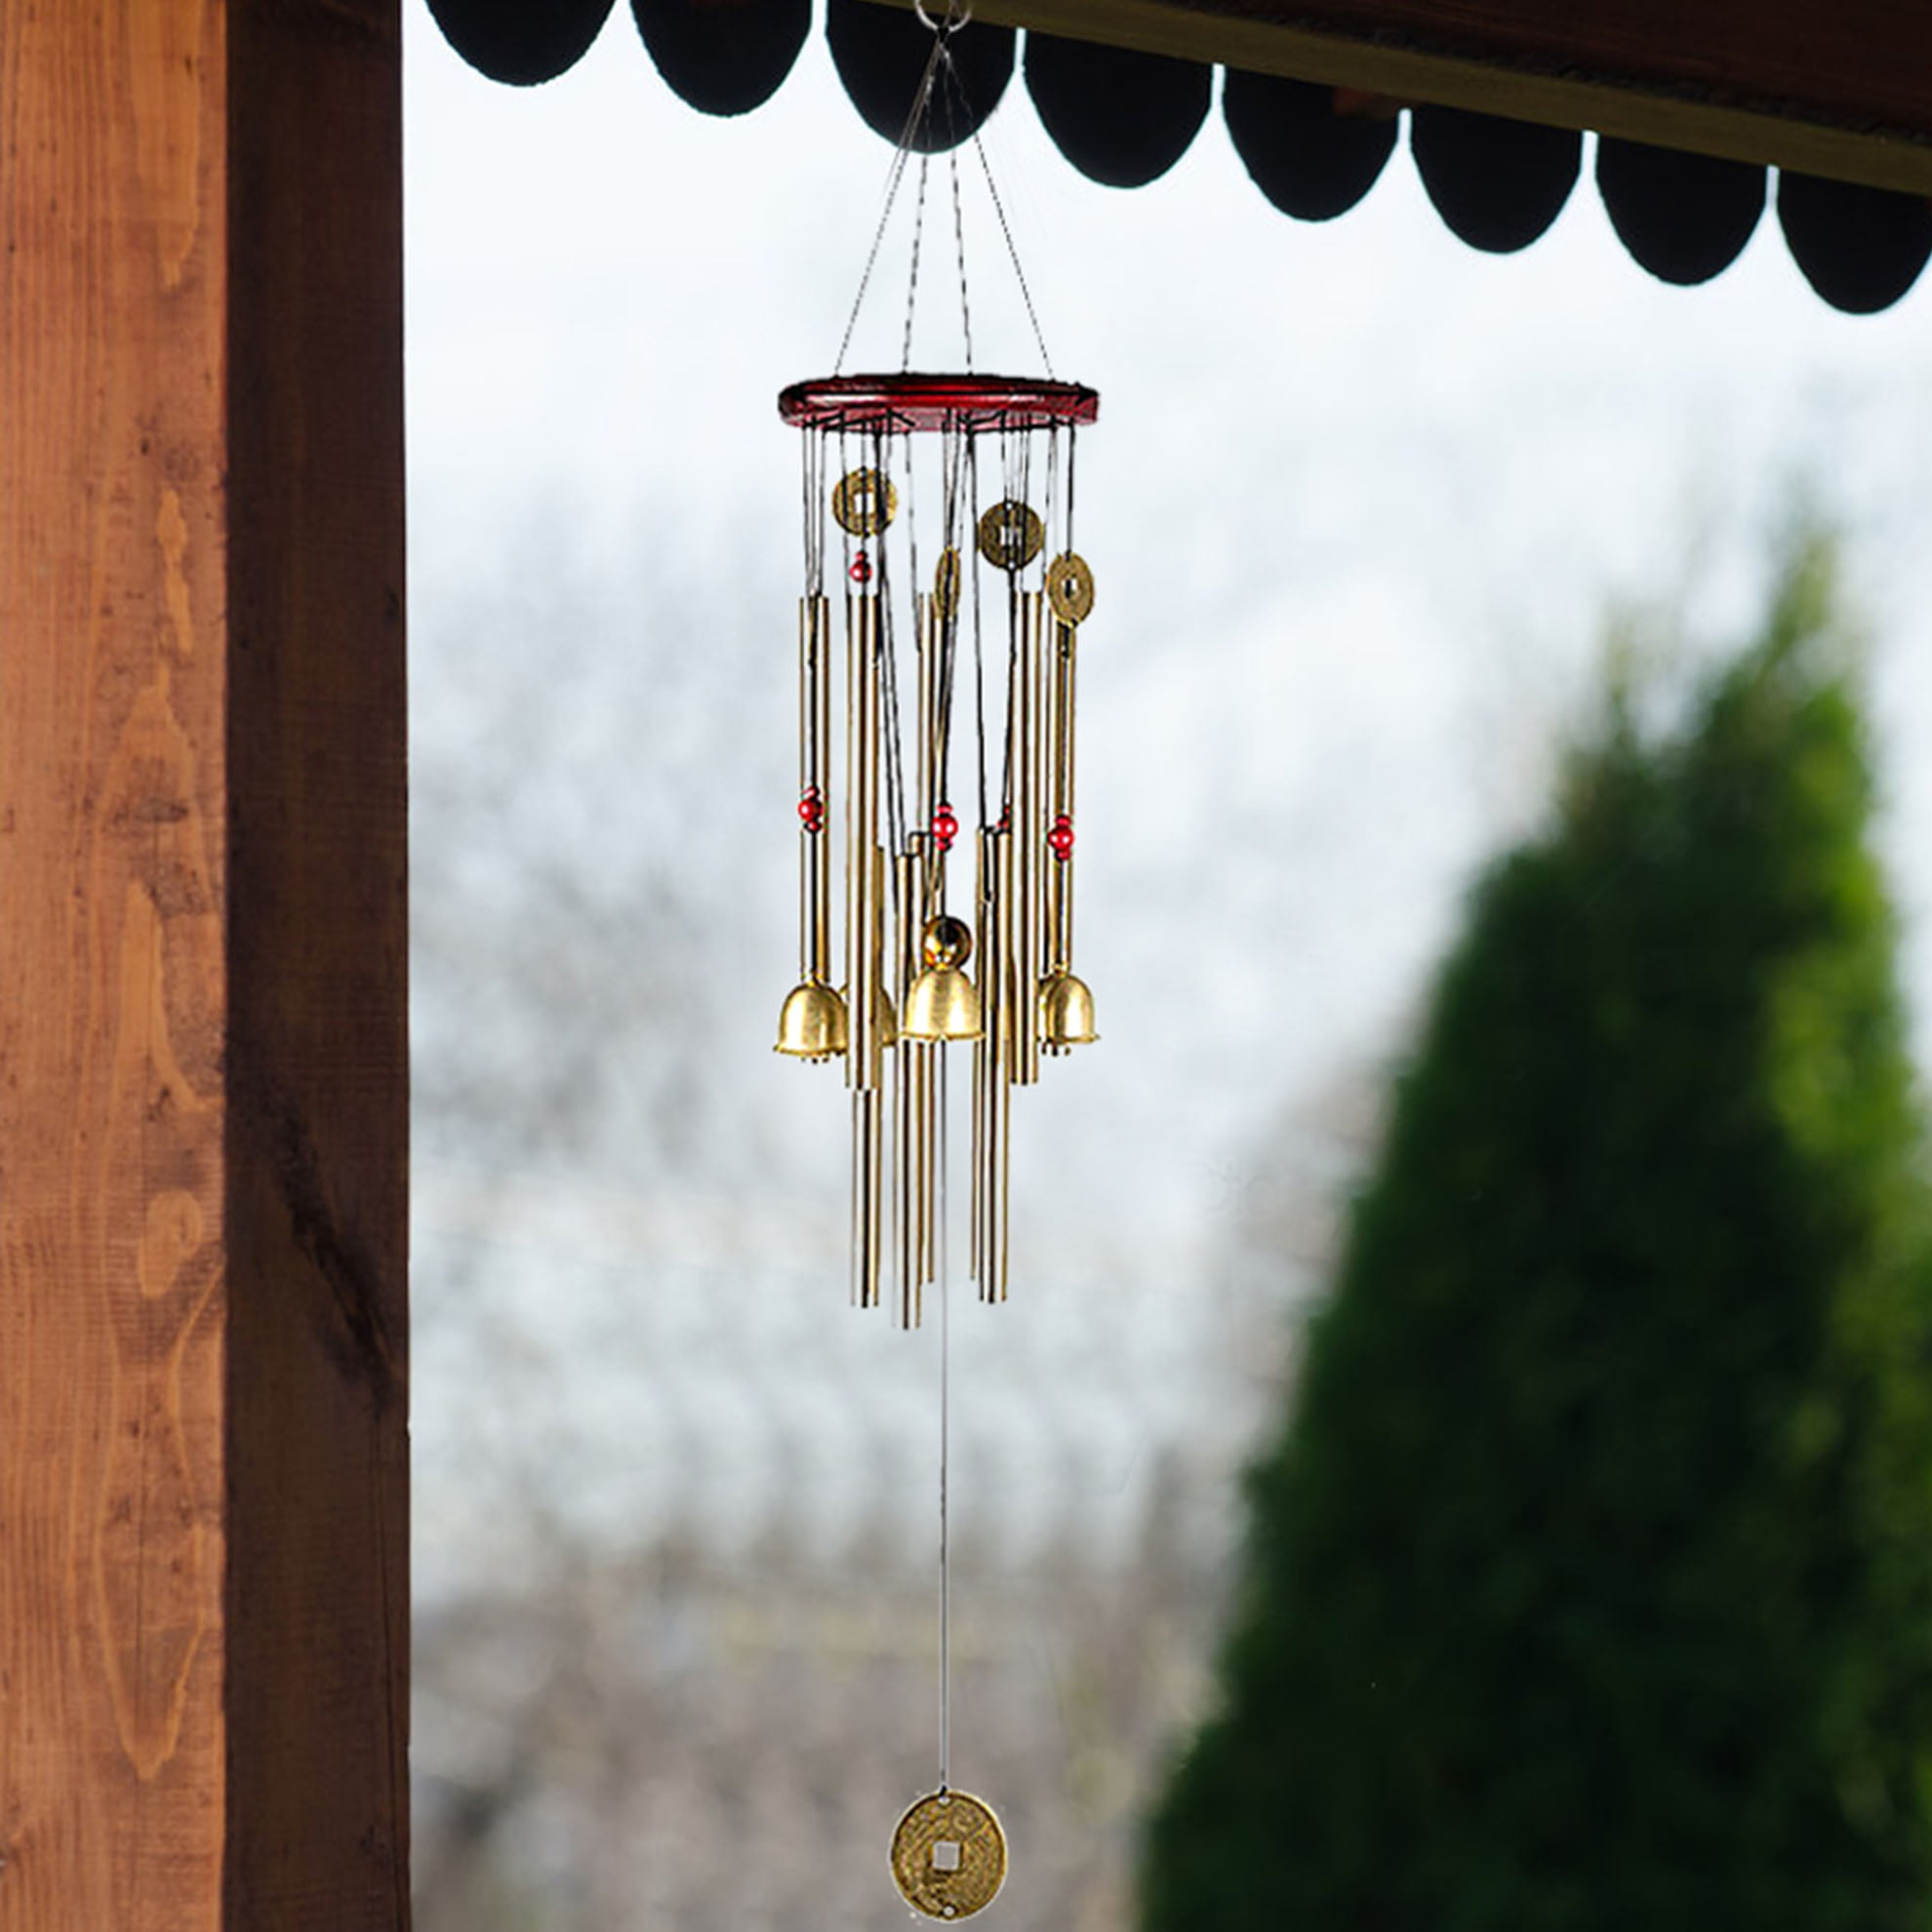 Ancient Style Wind Chimes 4 Tubes 5 Bells Yard Garden Outdoor Living Decor Q 